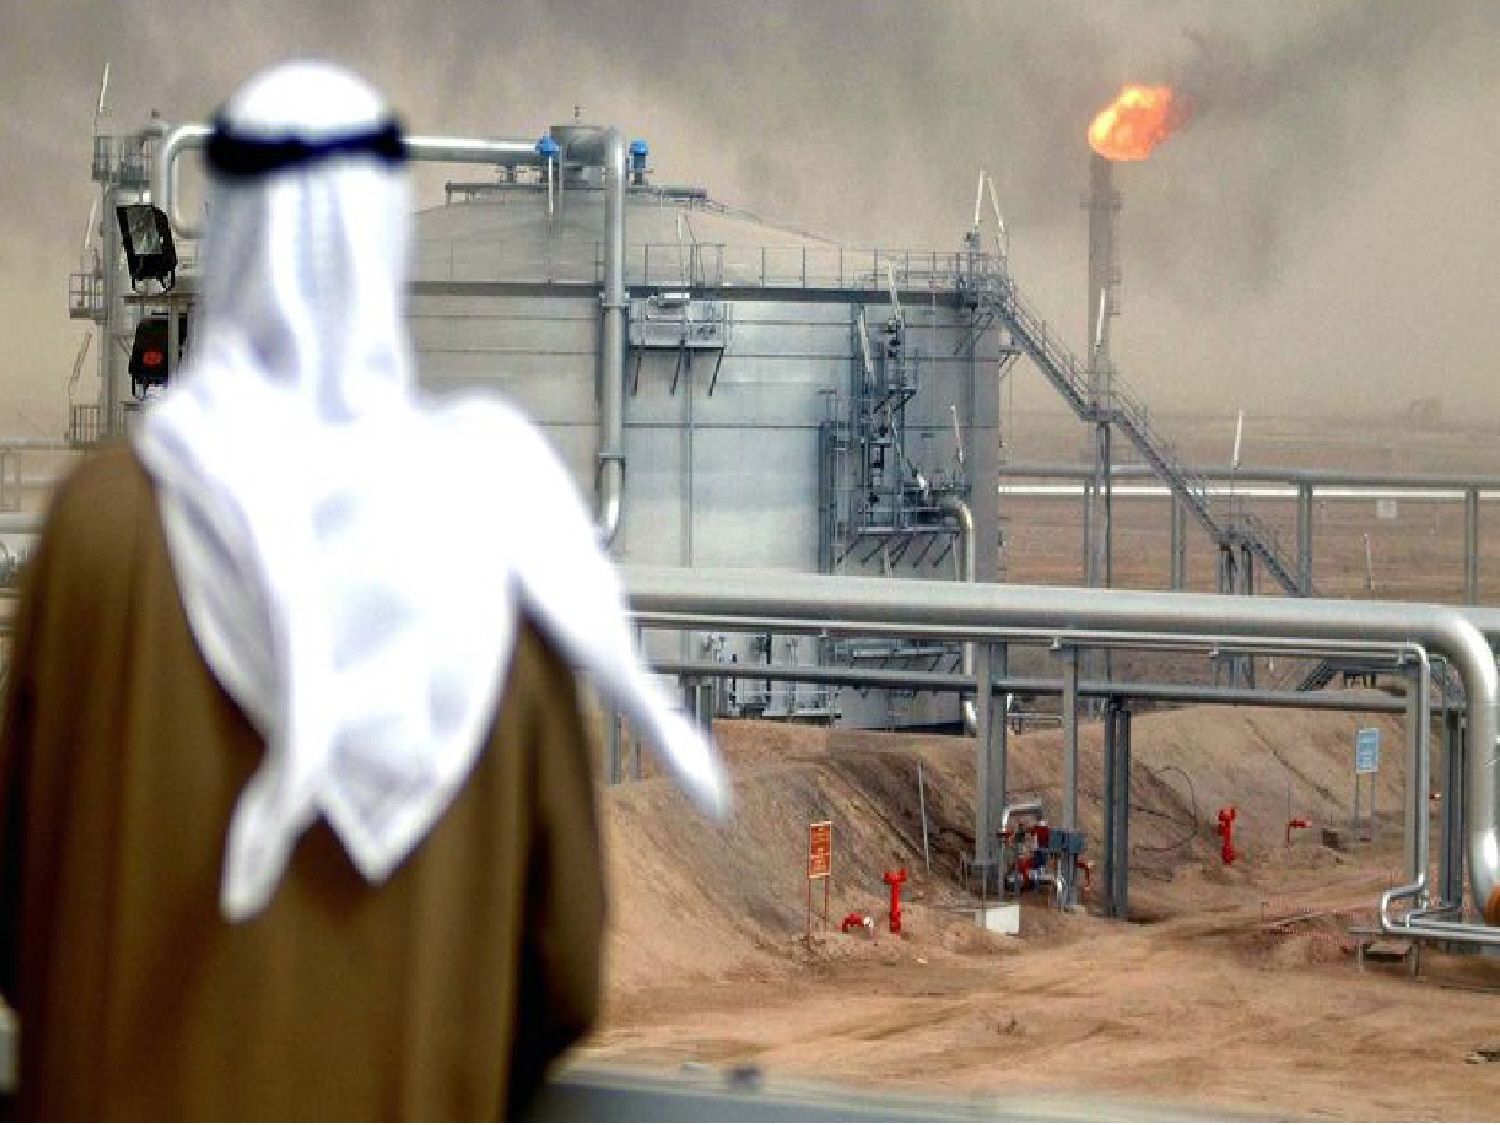 Saudi Arabia Exceeds Oil-Production Cap for First Time